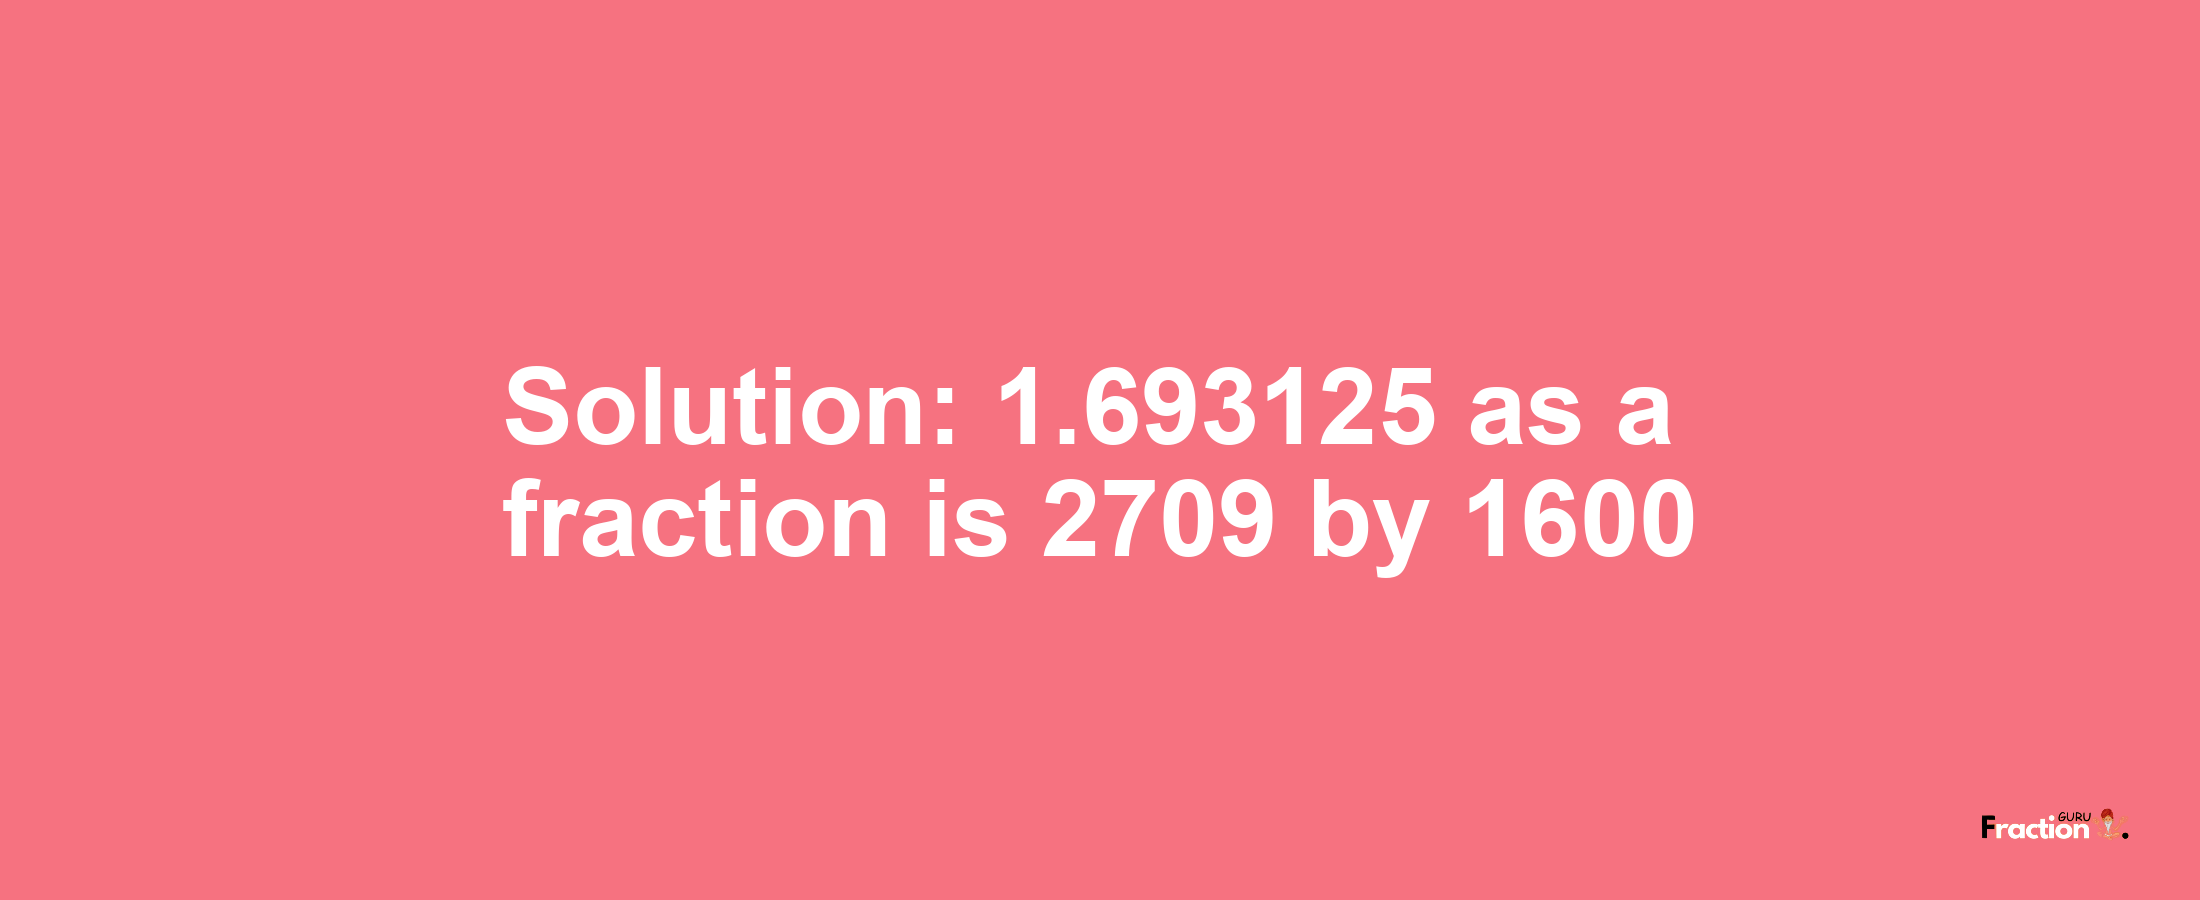 Solution:1.693125 as a fraction is 2709/1600